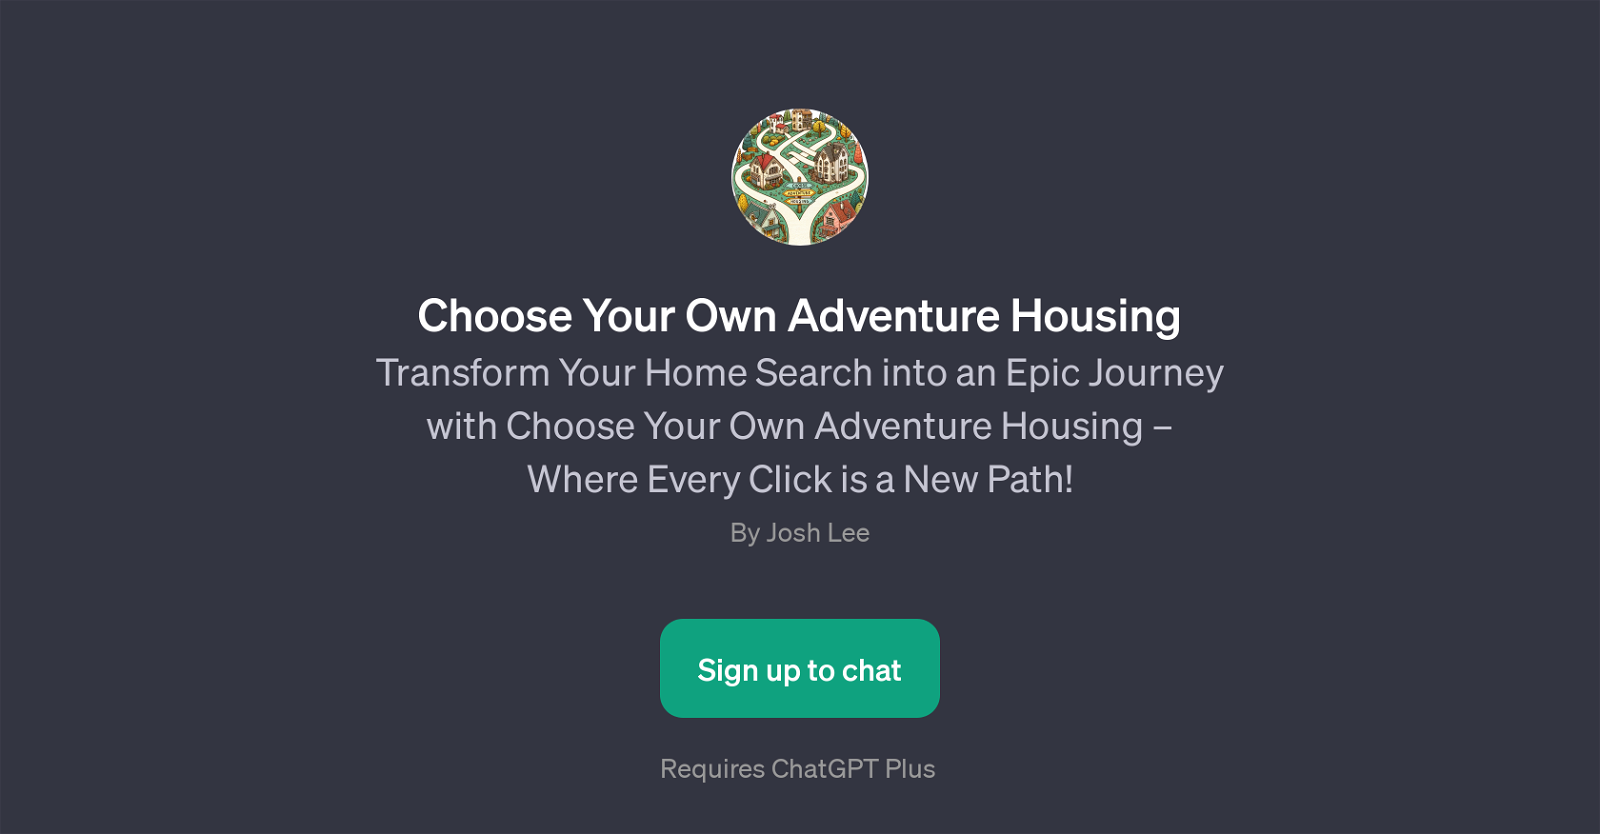 Choose Your Own Adventure Housing website